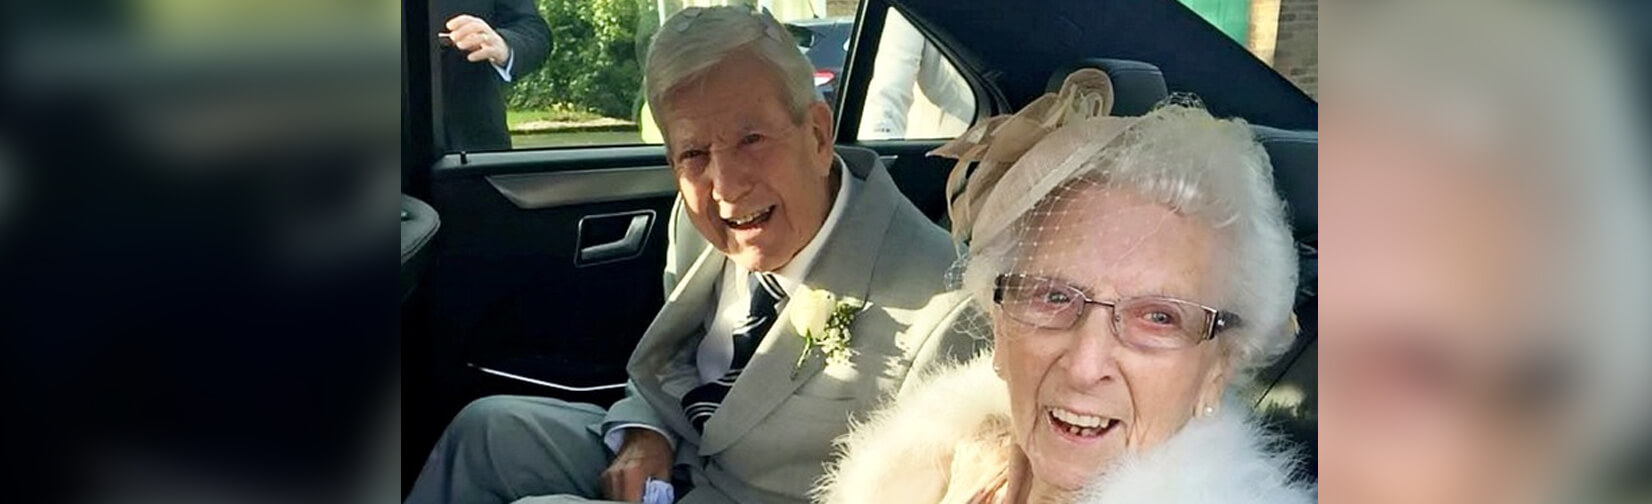 90-year-old groom marries his 96-year-old sweetheart